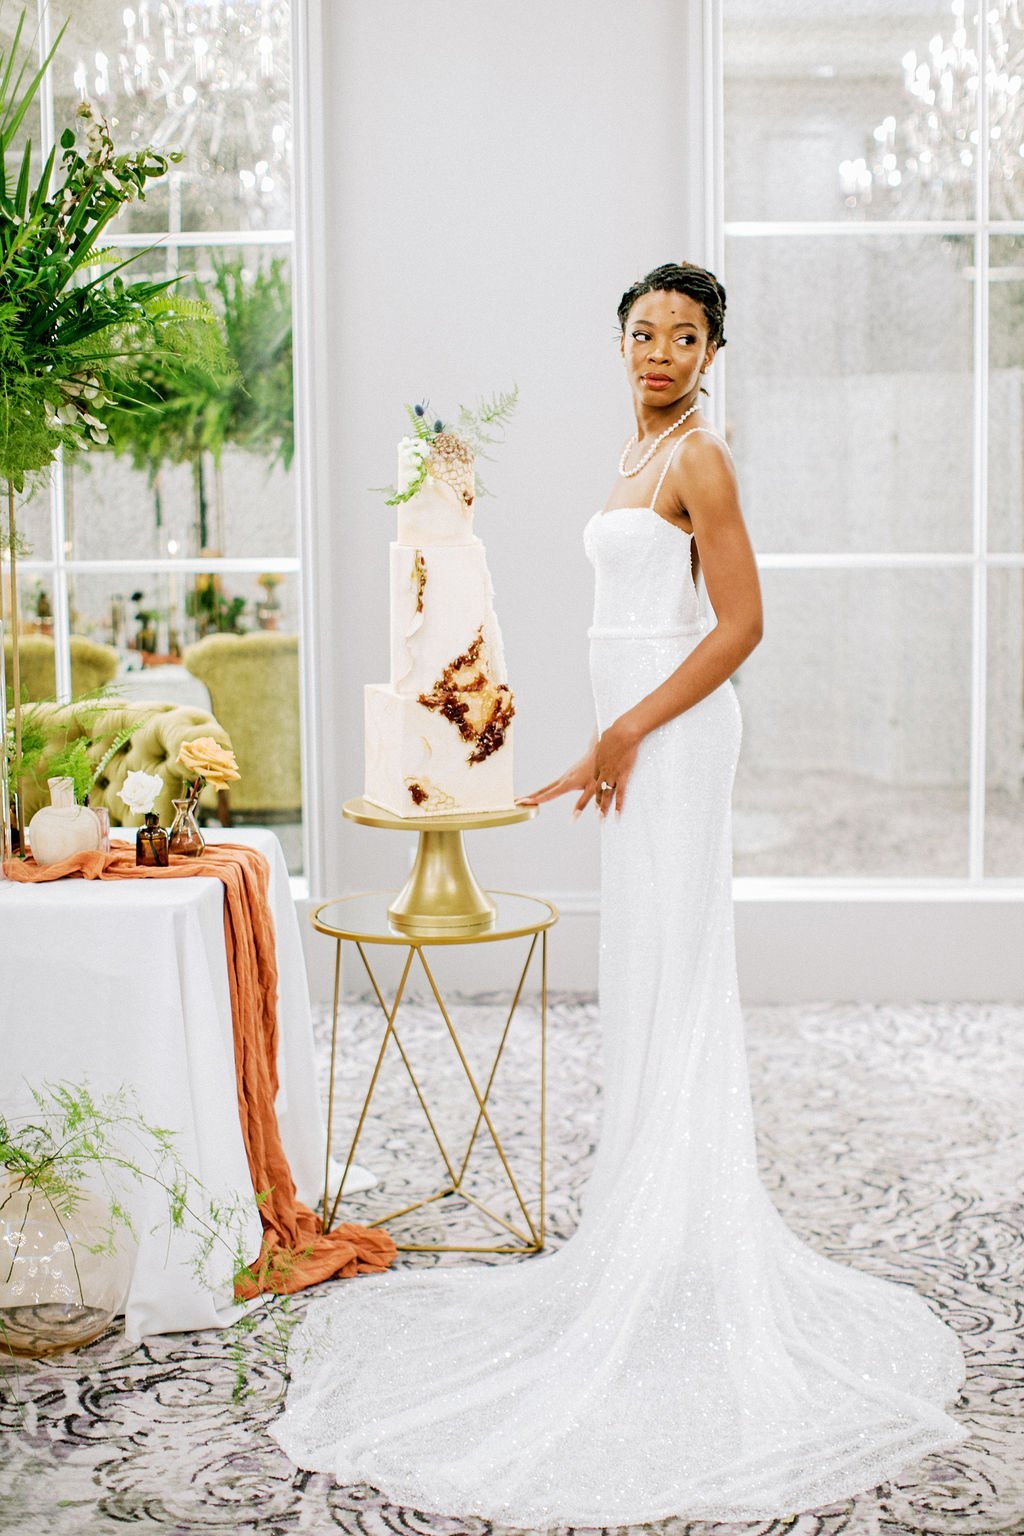 5-things-to-know-before-booking-your-wedding-florist-brought-to-you-by-savannah-wedding-planner-and-savannah-florist-ivory-and-beau-savannah-plant-riverside-district-savannah-wedding-savannah-bridal-shop-maggie-sottero-made-wiith-love-bridal-37.jpg